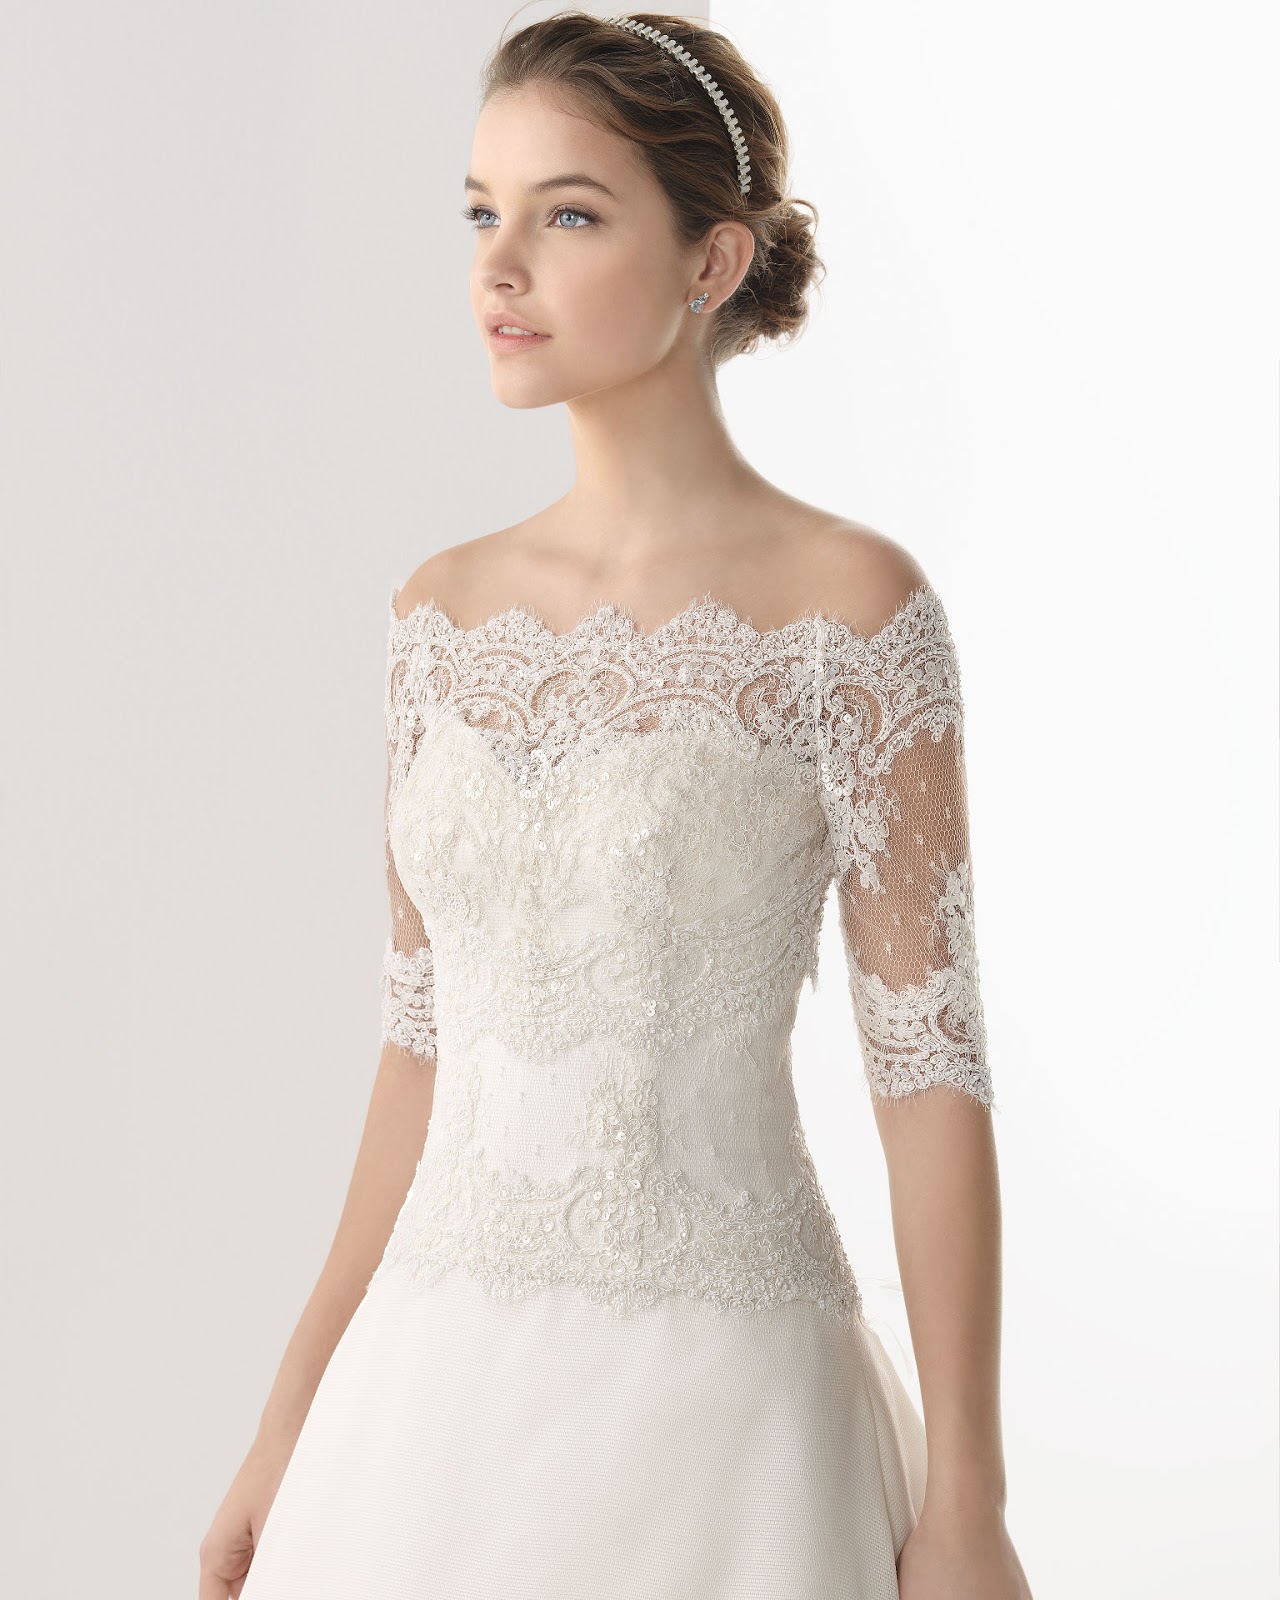 Lace with 3 4 Sleeves Wedding Dresse